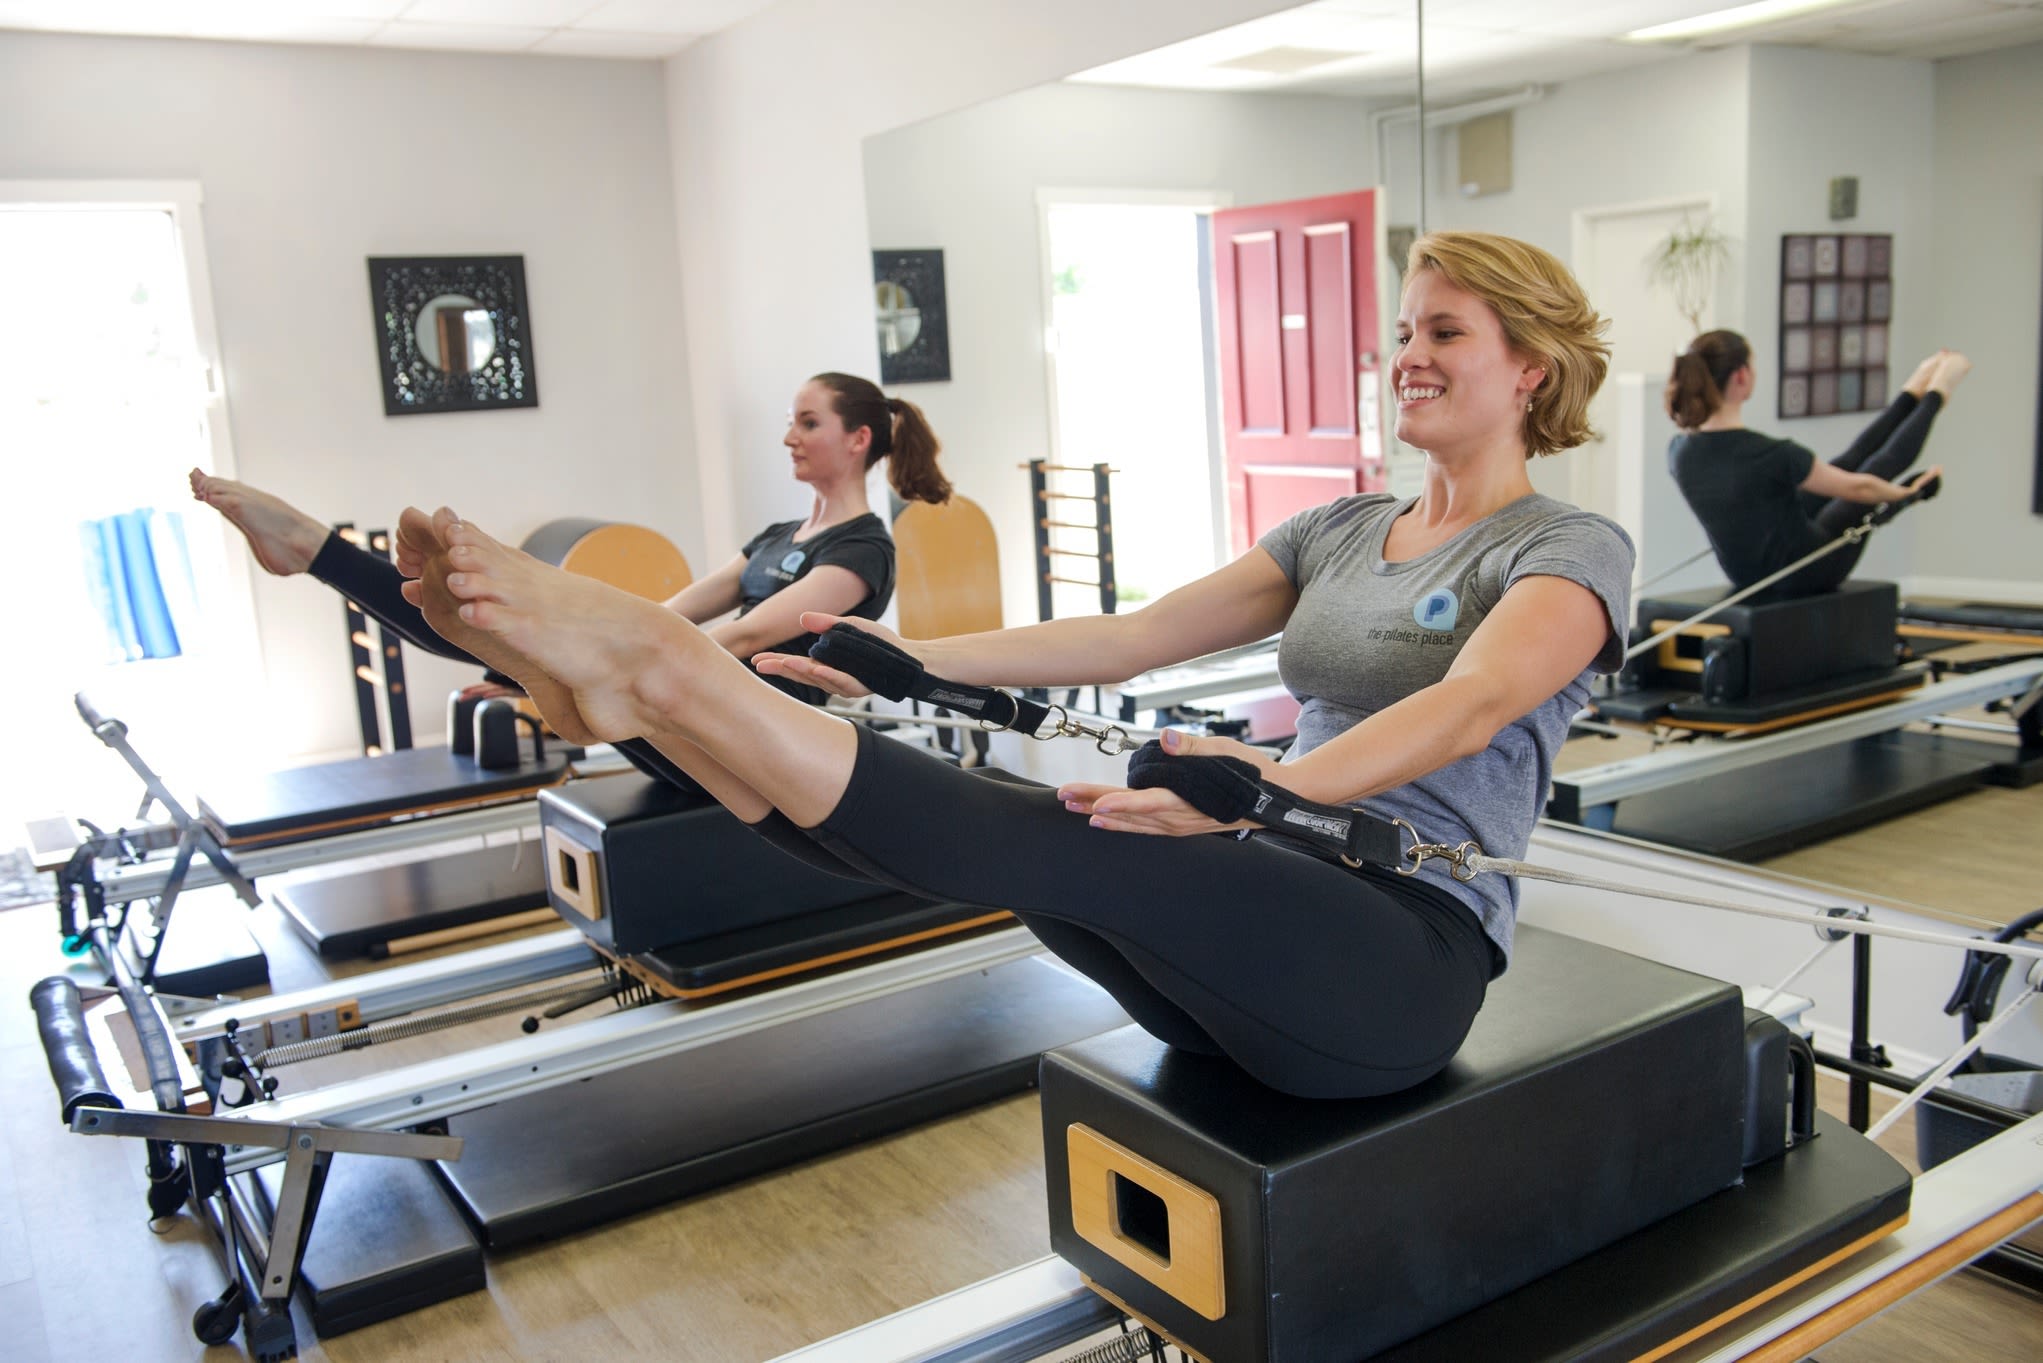 SESSION Pilates - Lovers Lane: Read Reviews and Book Classes on